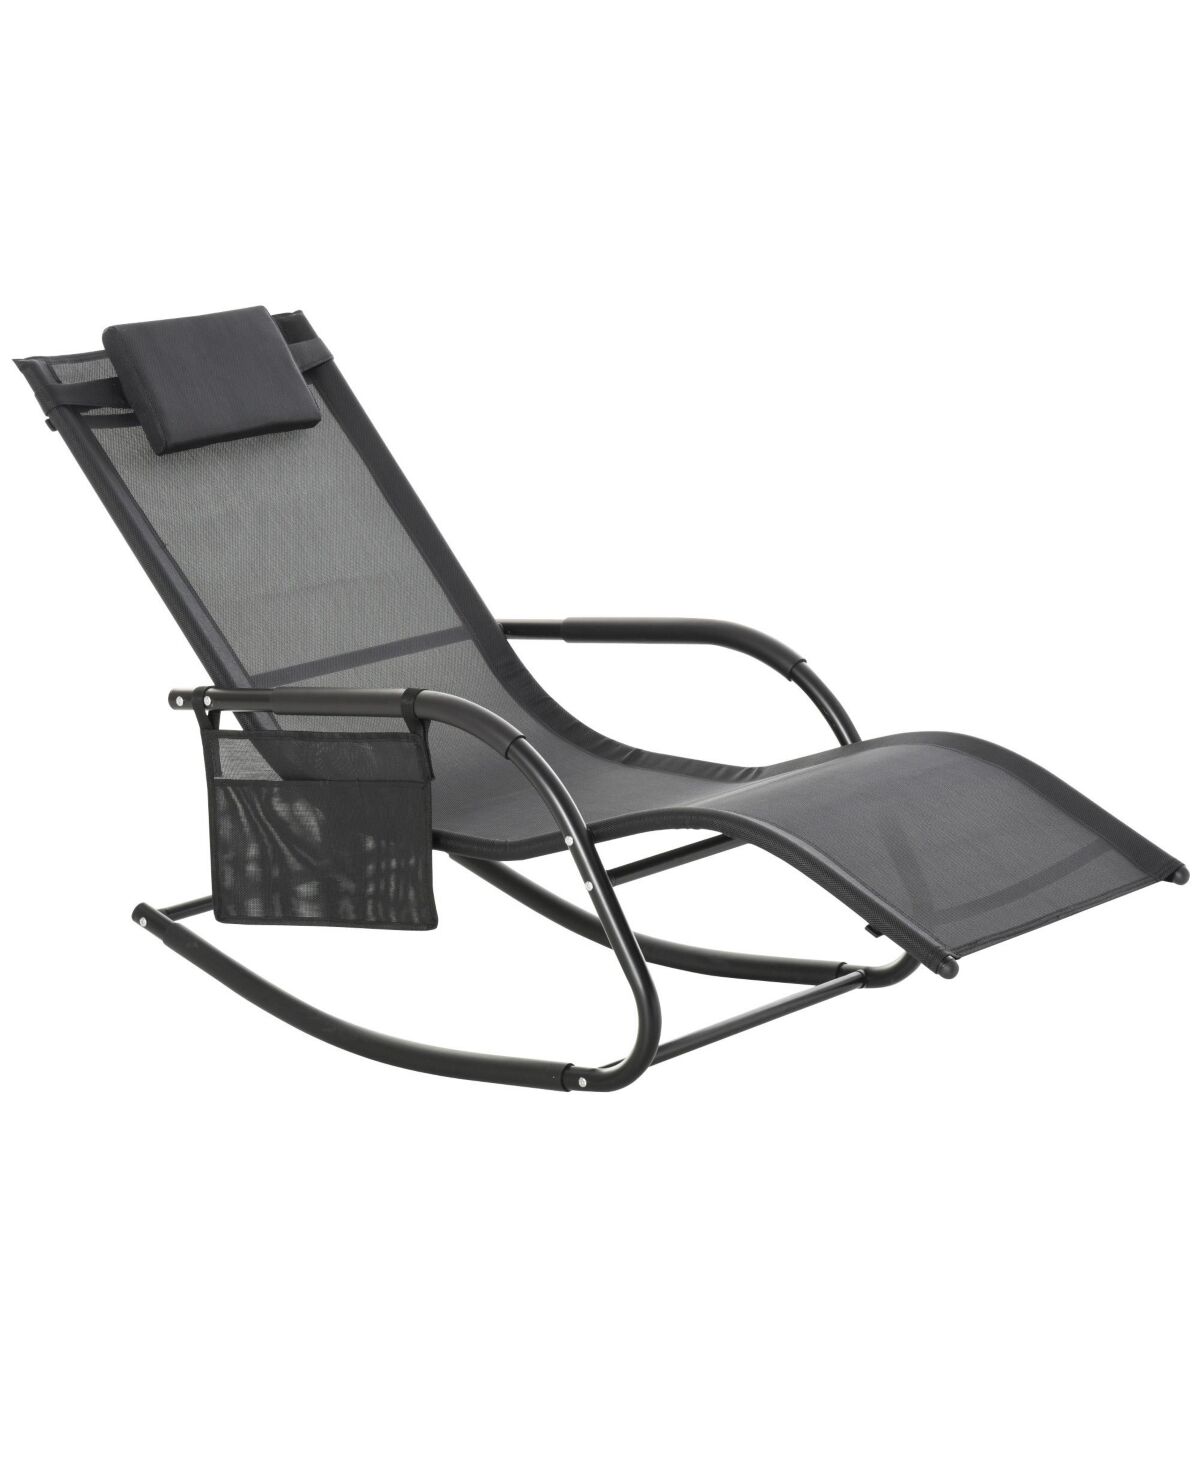 Outsunny Outdoor Rocking Chair, Patio Sling Sun Lounger, Pocket, Recliner Rocker, Lounge Chair with Detachable Pillow for Deck, Garden, or Pool, Black